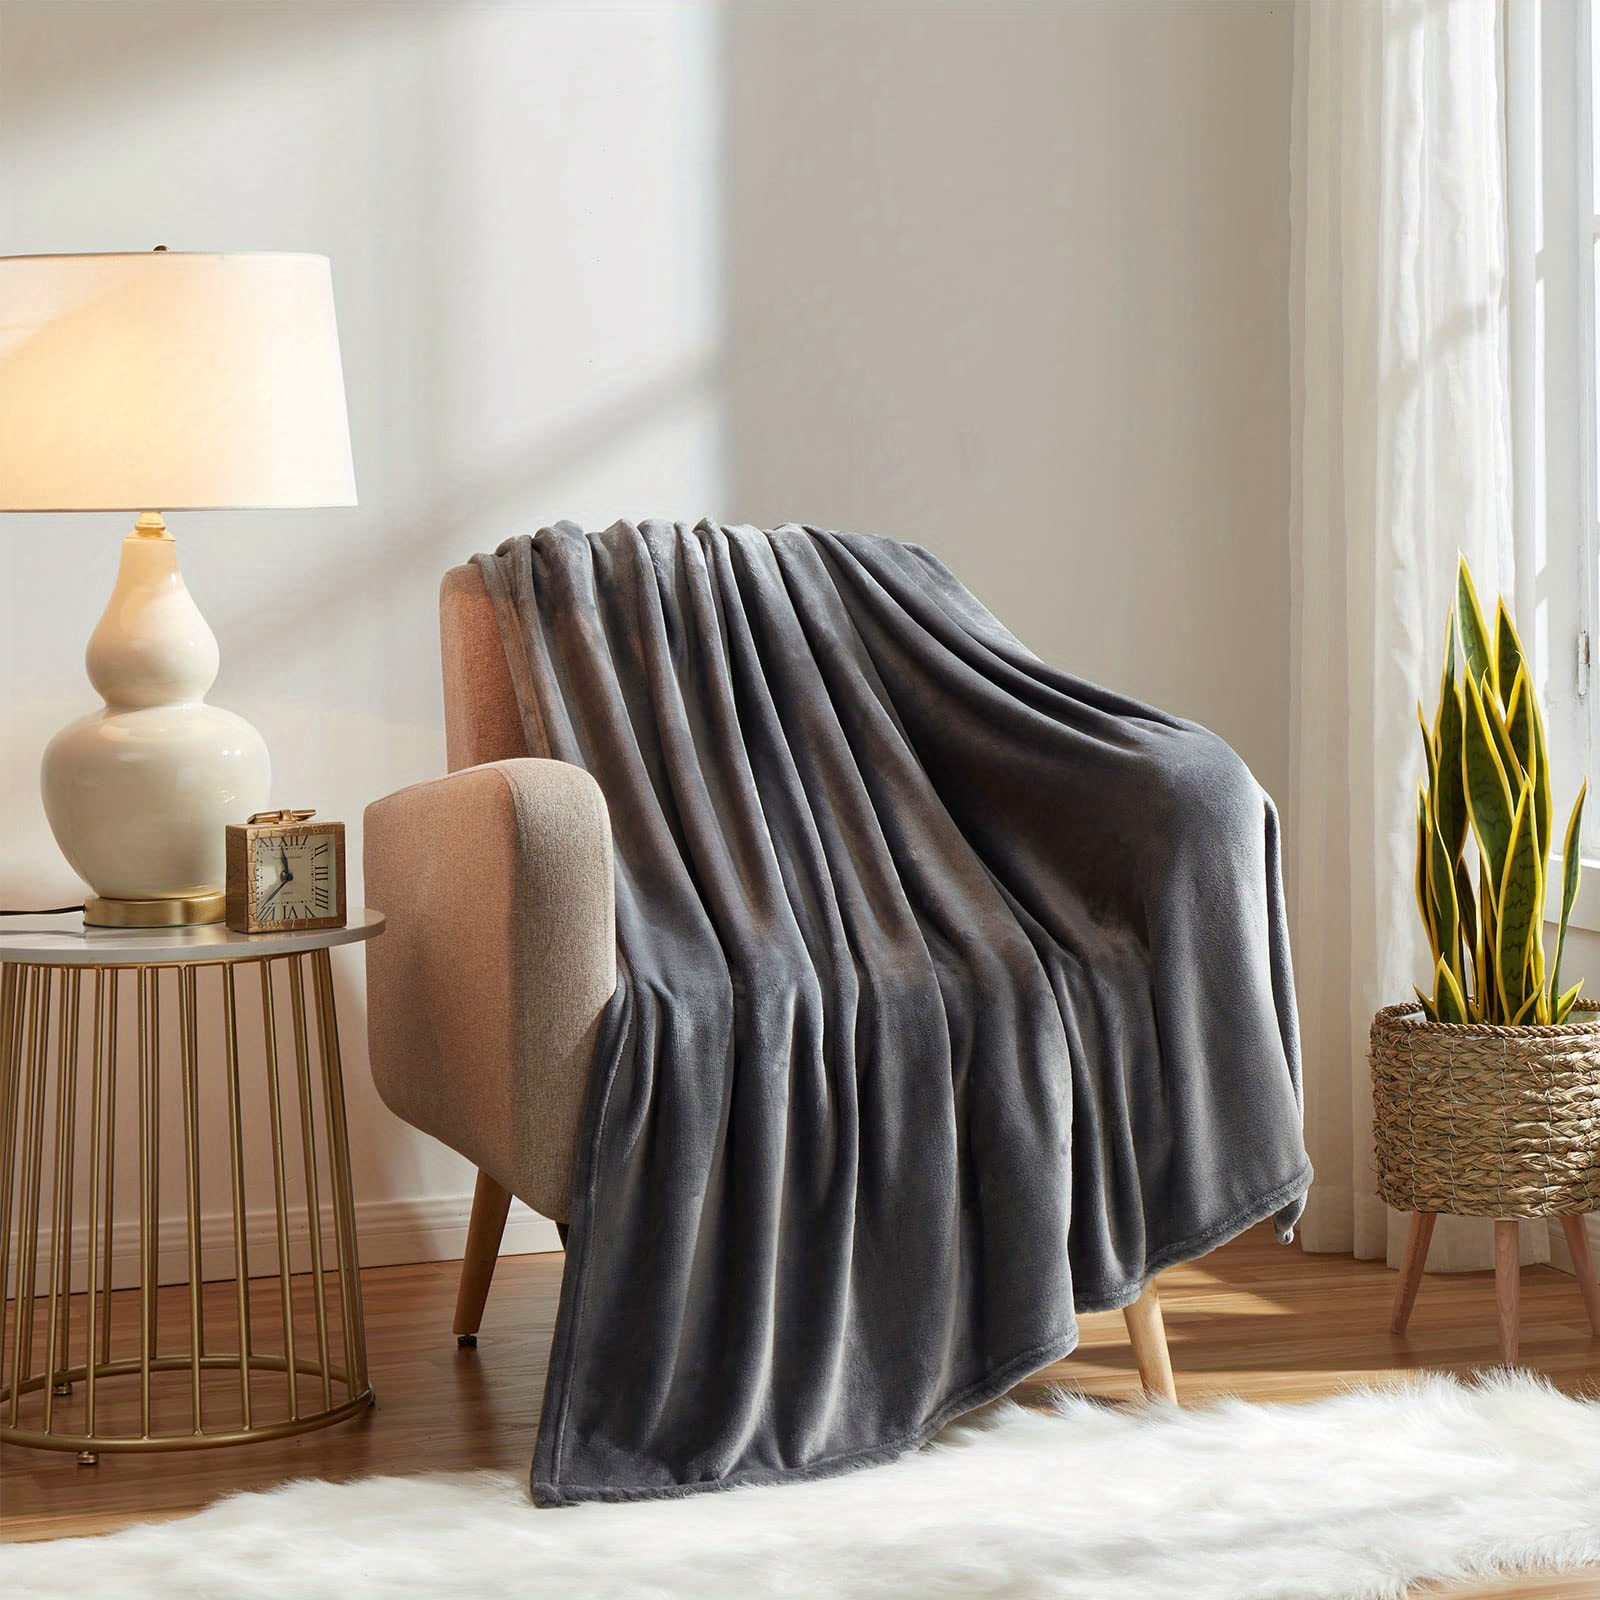  Fufafayo Blankets for Couch, Soft Microfiber Flannel